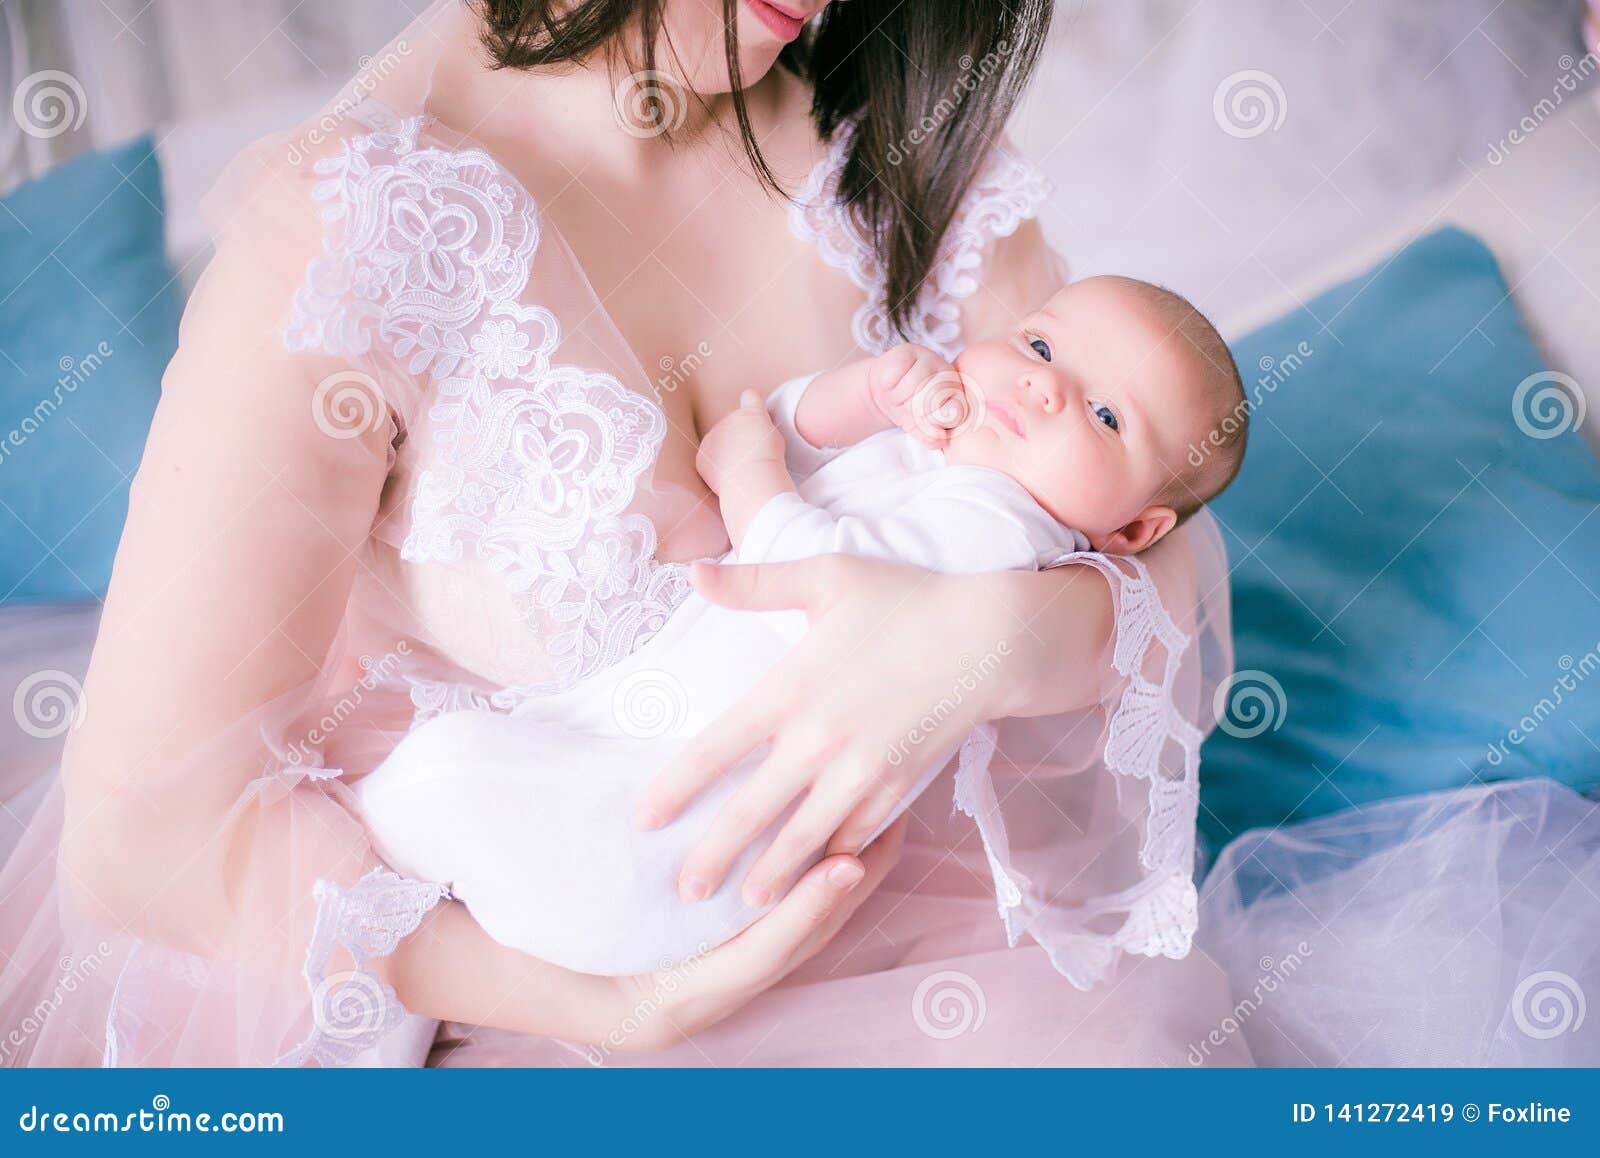 Young Mother In A Boudoir Dress With A Baby In Her Arms By The Canopy Bed Stock Image Image Of Beautiful Family